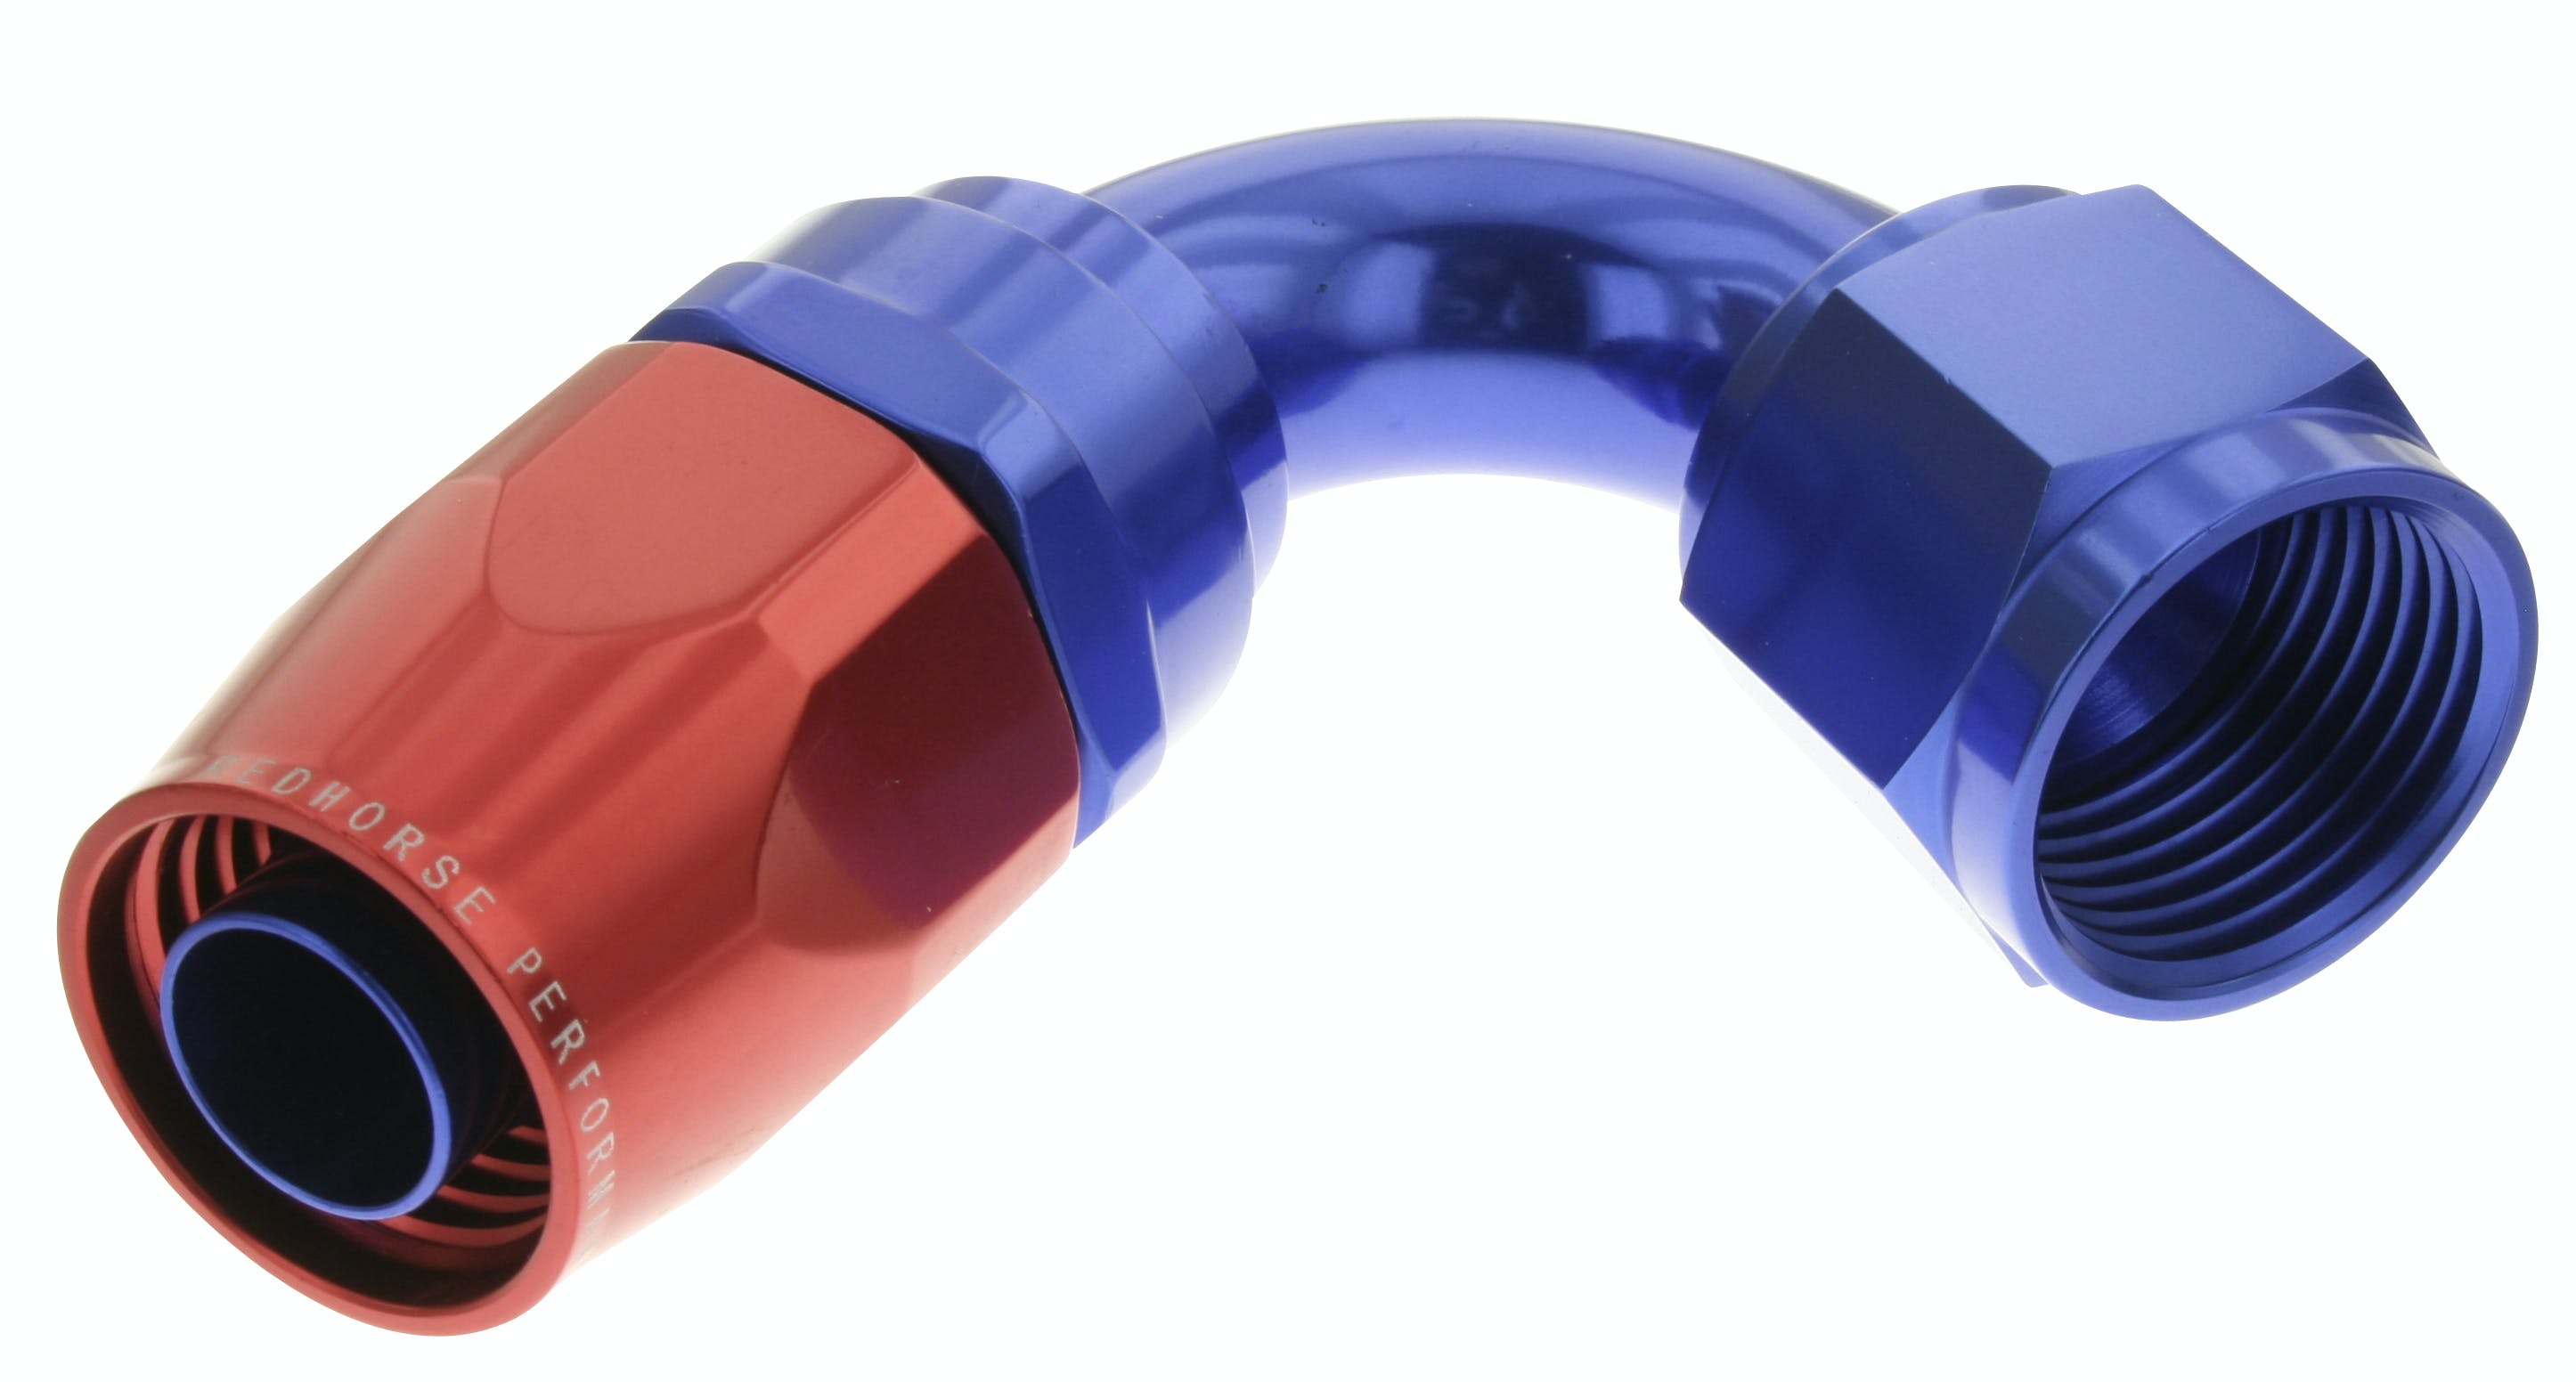 Redhorse Performance 1120-16-1 -16 120 degree Female Aluminum Hose End - red and blue